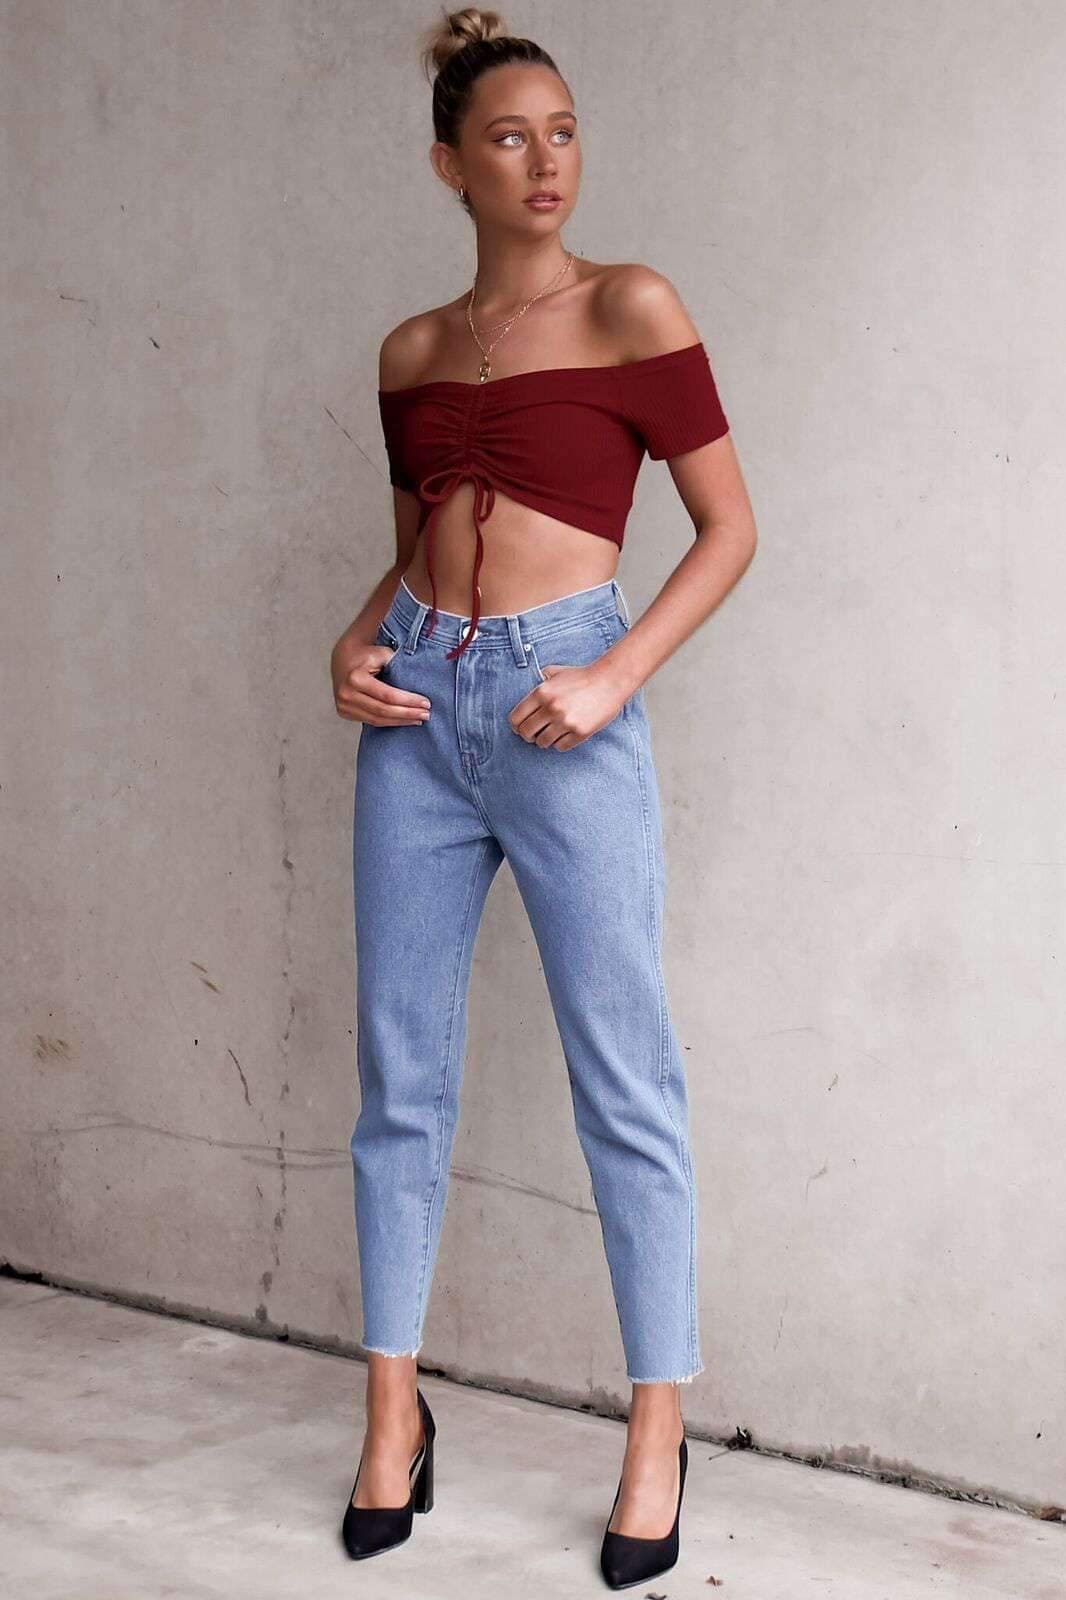 India Top, CROP TOP, CROP TOPS, Dresses, OFF SHOULDER, SPO-DISABLED, TOPS, Our New India Top Is Now Only $41.00 Exclusive At Mishkah, Our New India Top is now only $41.00-We Have The Latest Women&#39;s Tops @ Mishkah Online Fashion Boutique-MISHKAH